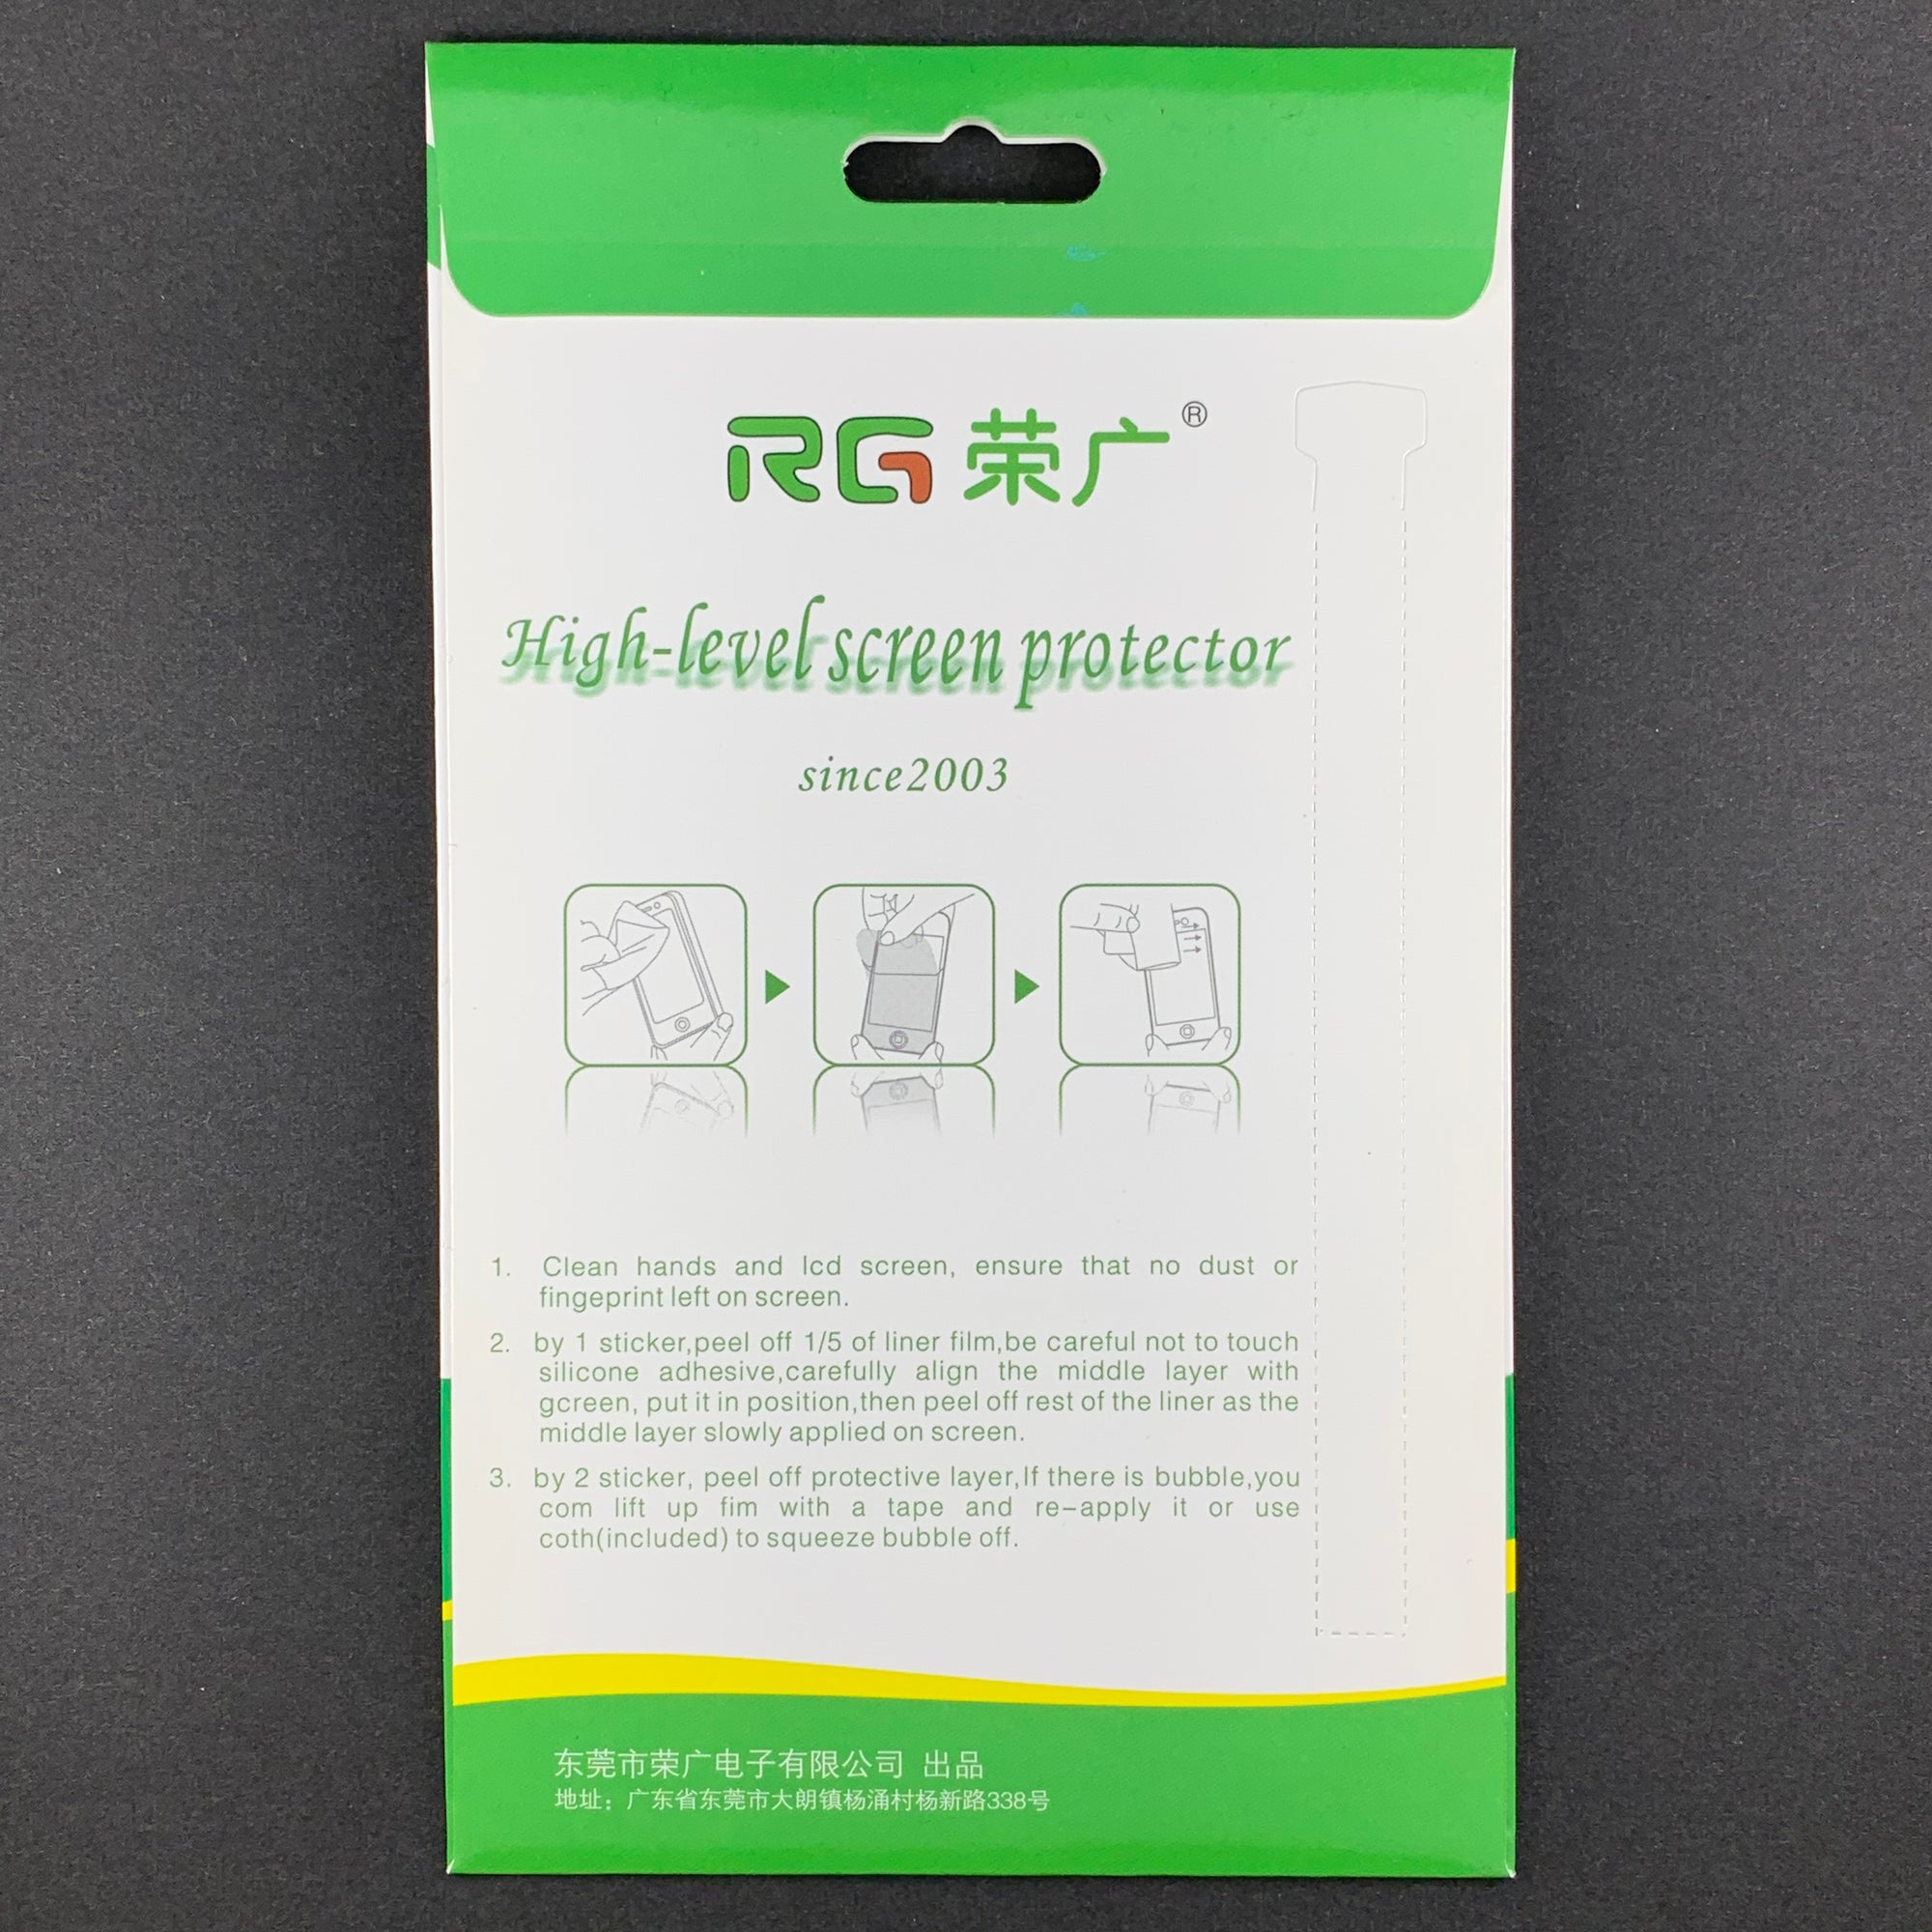 RG Professional Soft Film Screen Protector for iPad Pro 11" 1st / 2nd Gen (CLEAR, 2-PACK)